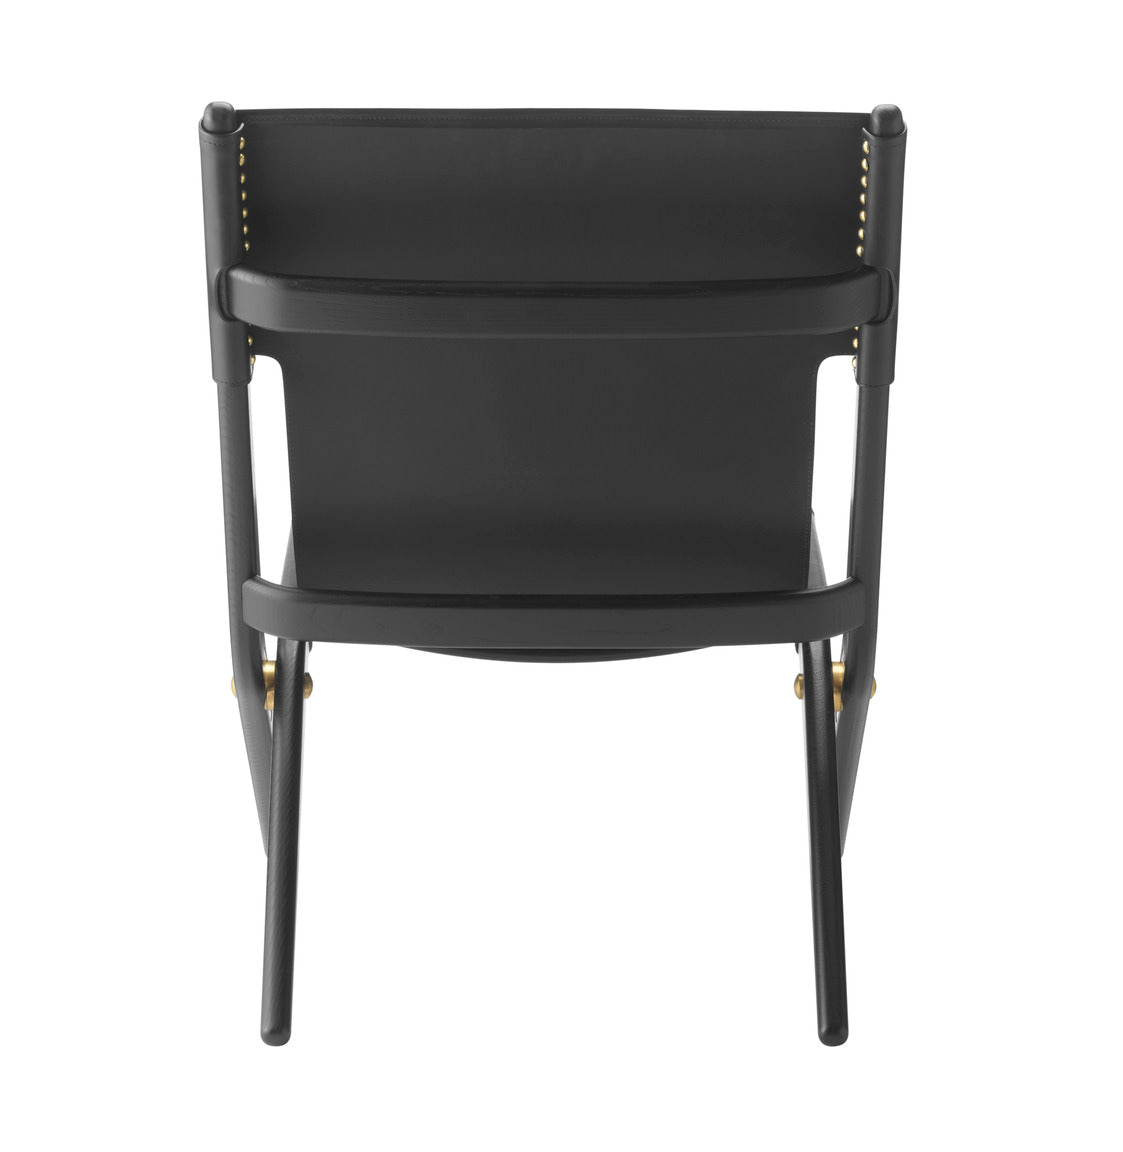 Saxe chair, blackstained oak/black leather